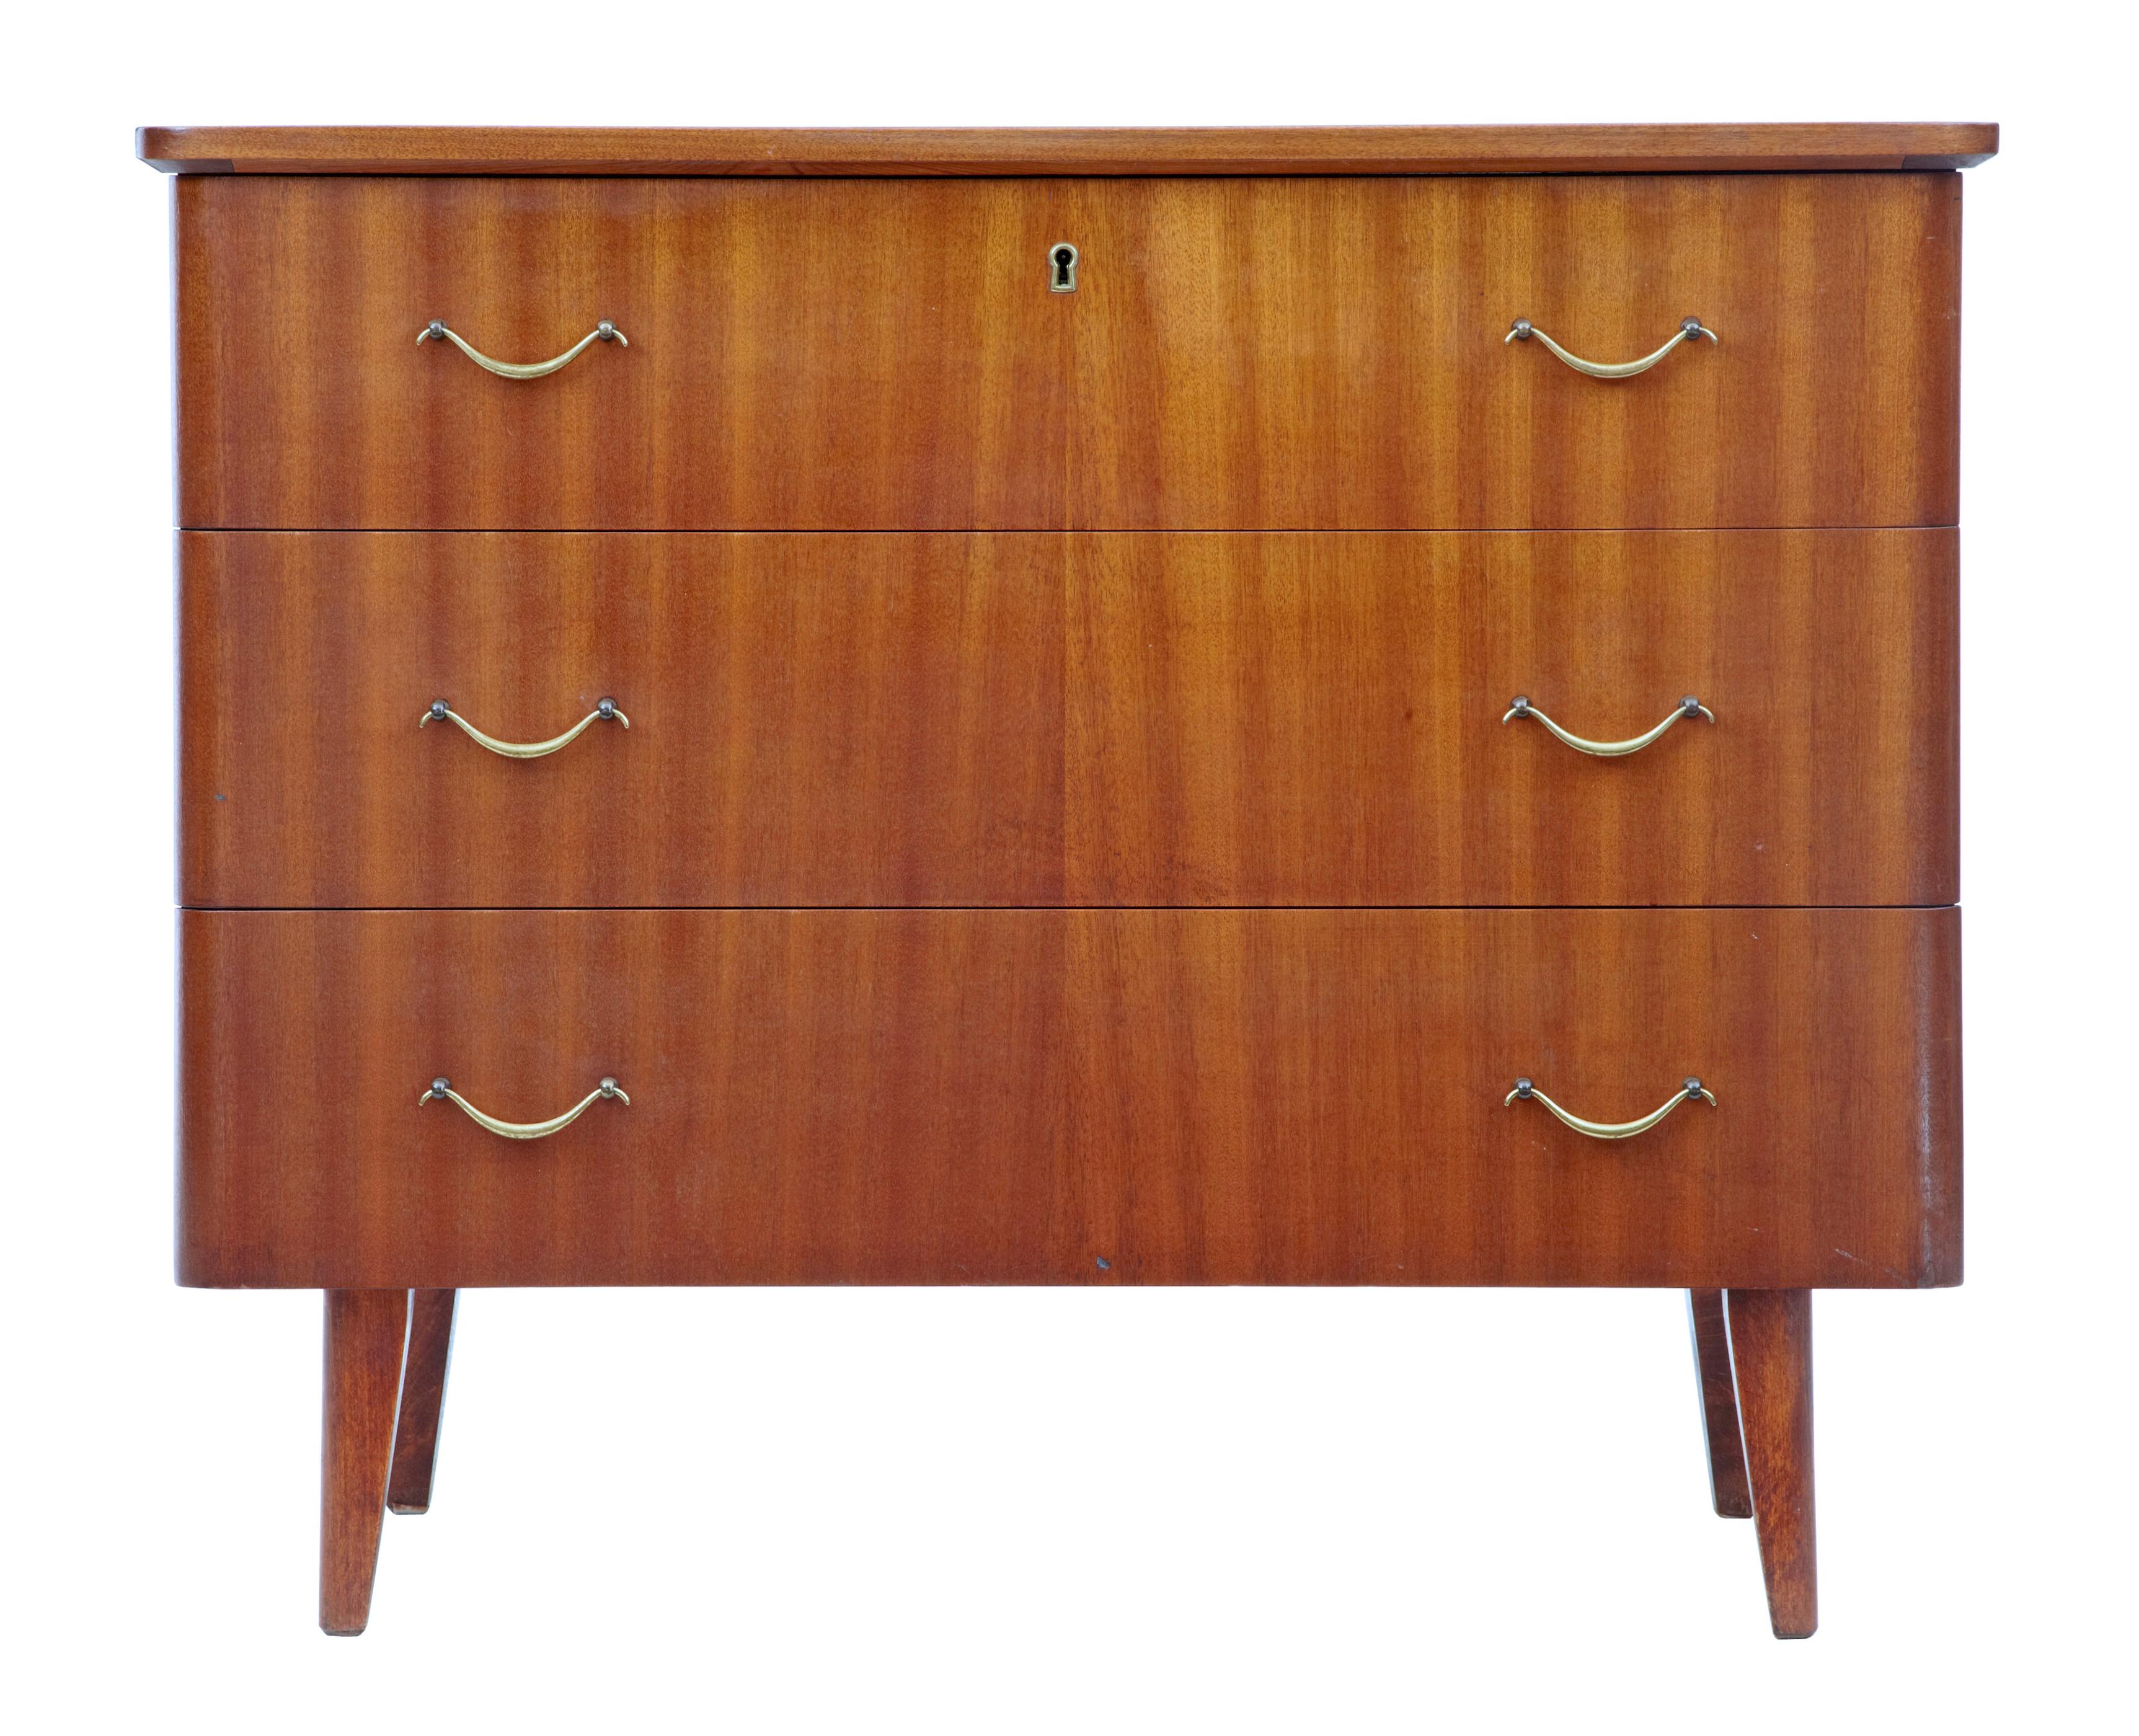 Mid-20th century Danish teak chest of drawers, circa 1960.

3 drawer scandinavian design chest of drawers from the 1960s. Veneered in teak and fitted with brass handles and escutheons.

Good rich color. Some light marks in line with use.